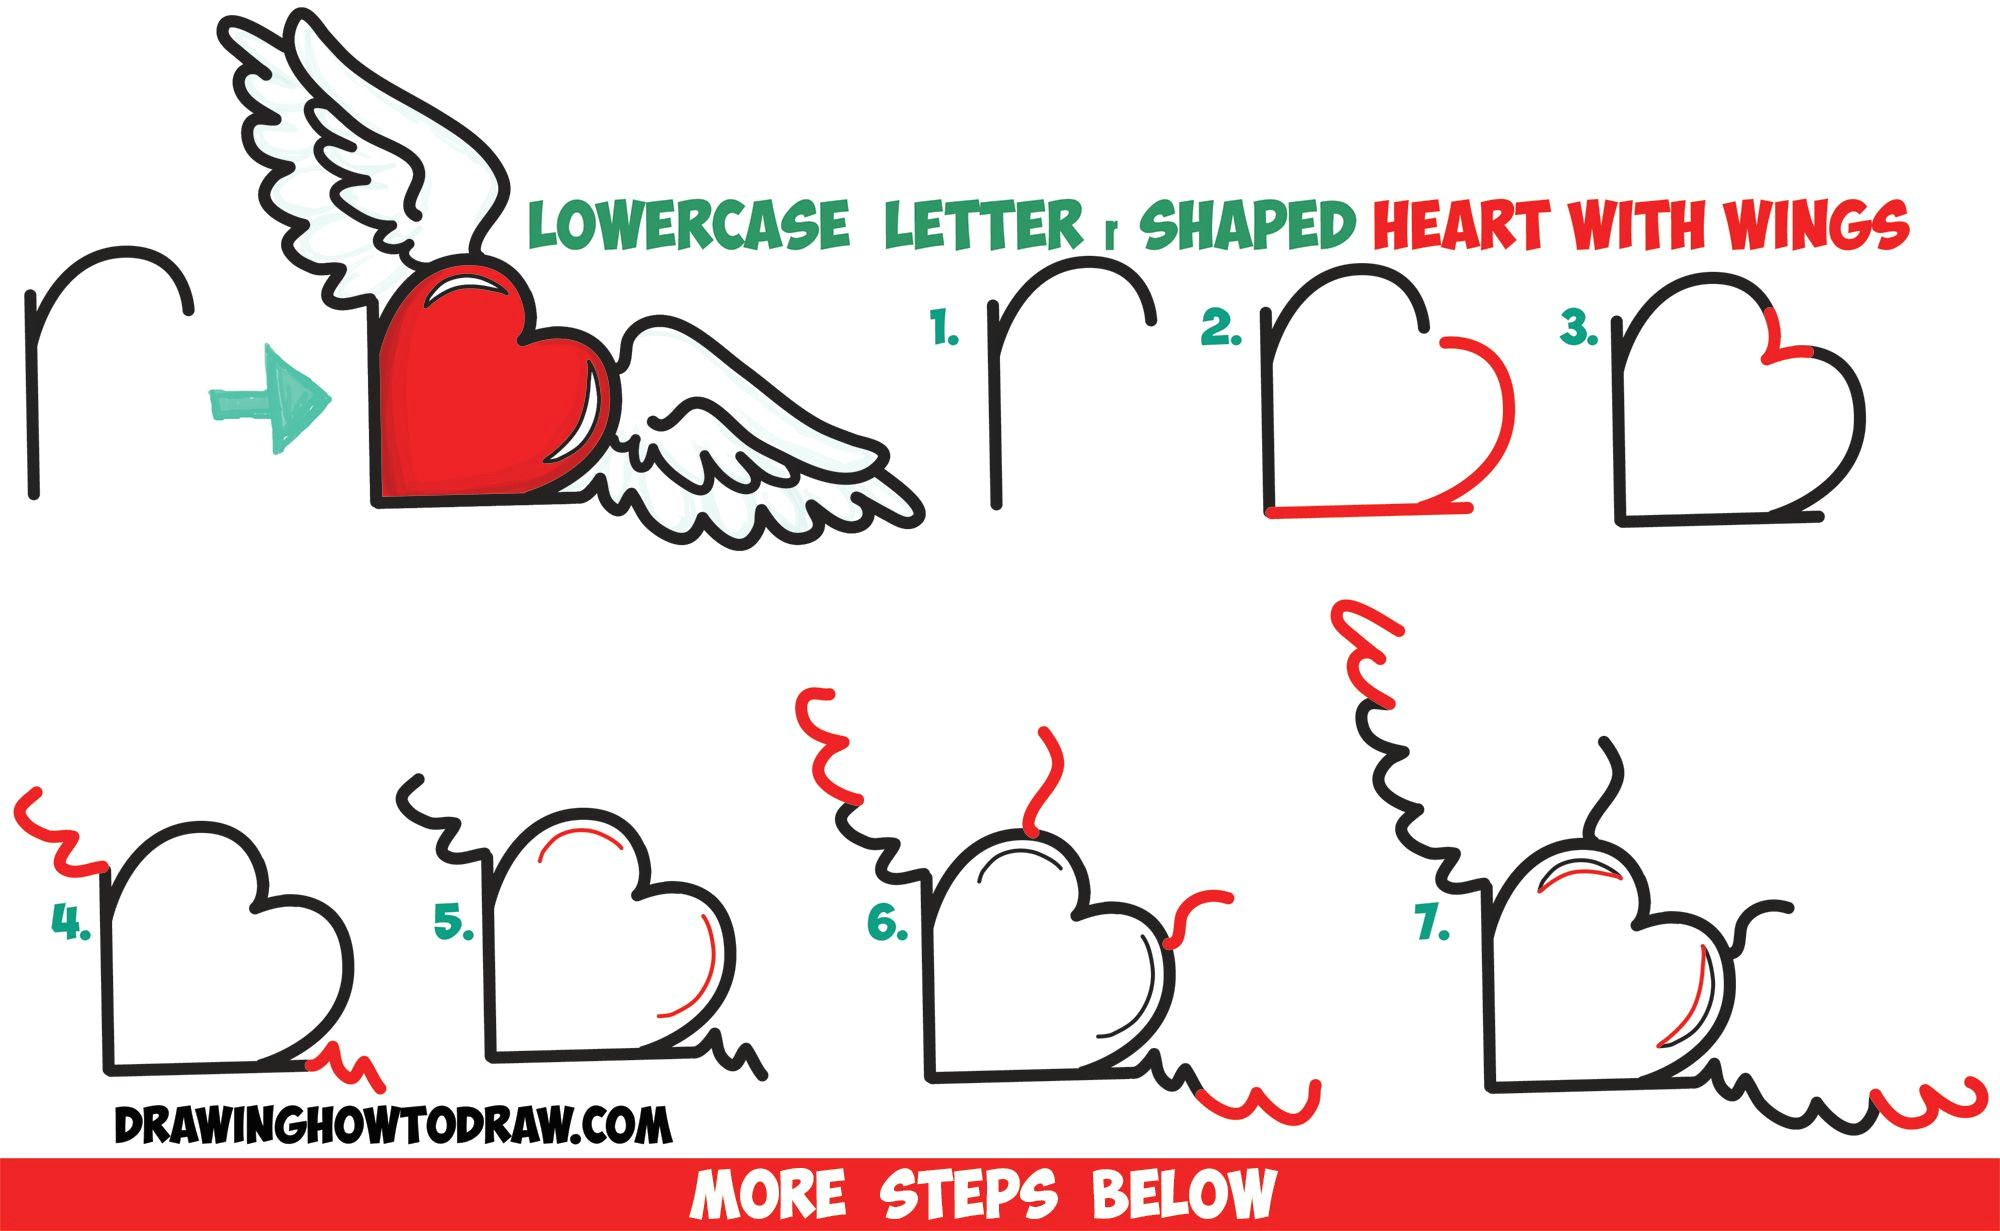 Drawing Of An Heart How to Draw Heart with Wings From Lowercase Letter R Shapes Easy